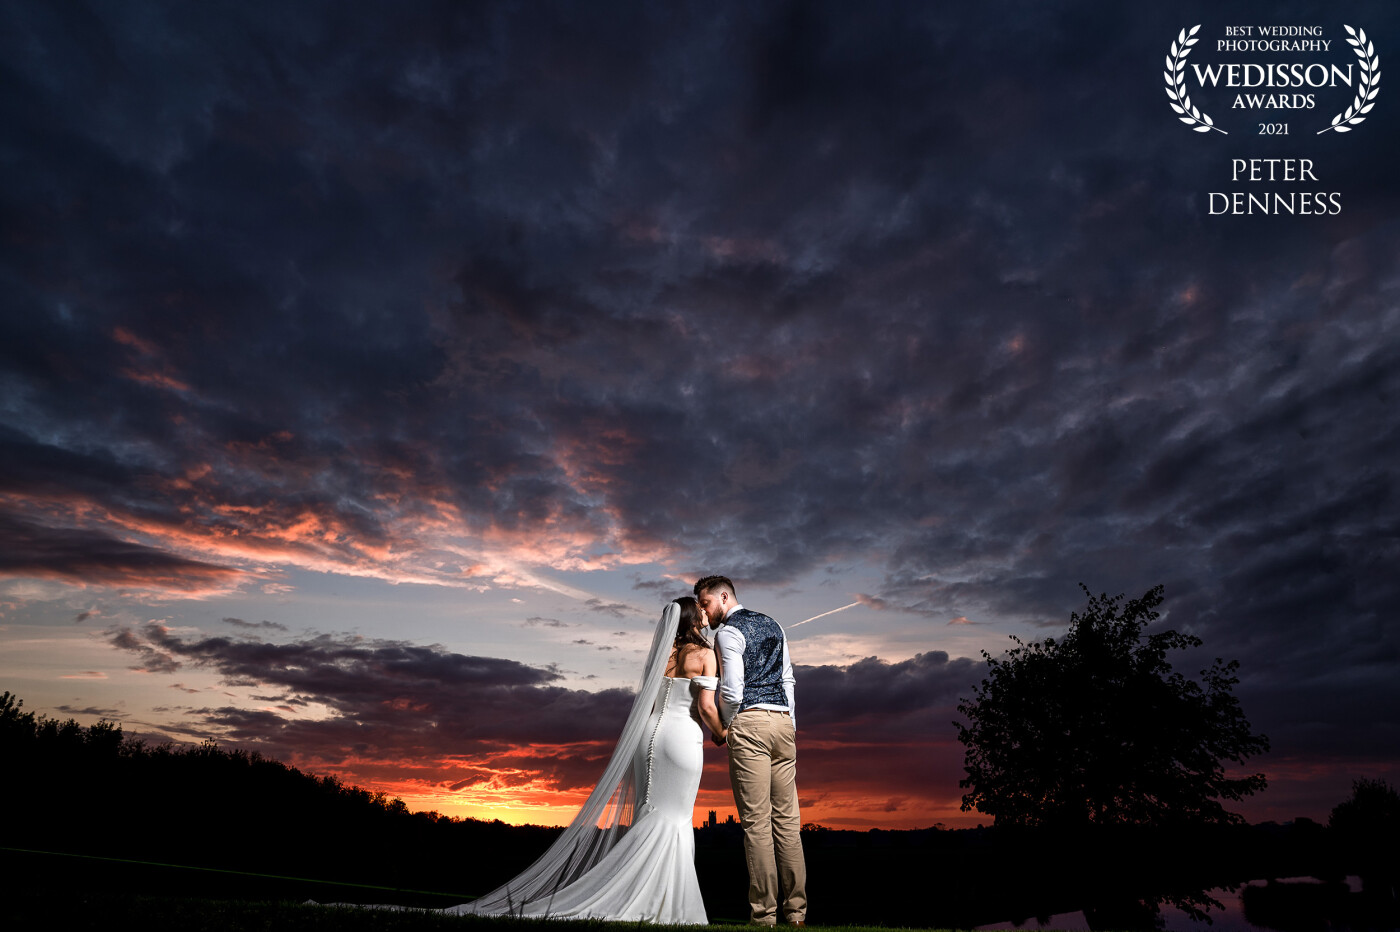 On the 4th time of trying Aj and Hannah finally managed to tie the knot at the Old Hall in Ely, and the sunset couldn't have been more perfect! I love a bit of off camera flash and combined with a wide angle lens, it allowed me to perfectly capture the scene.